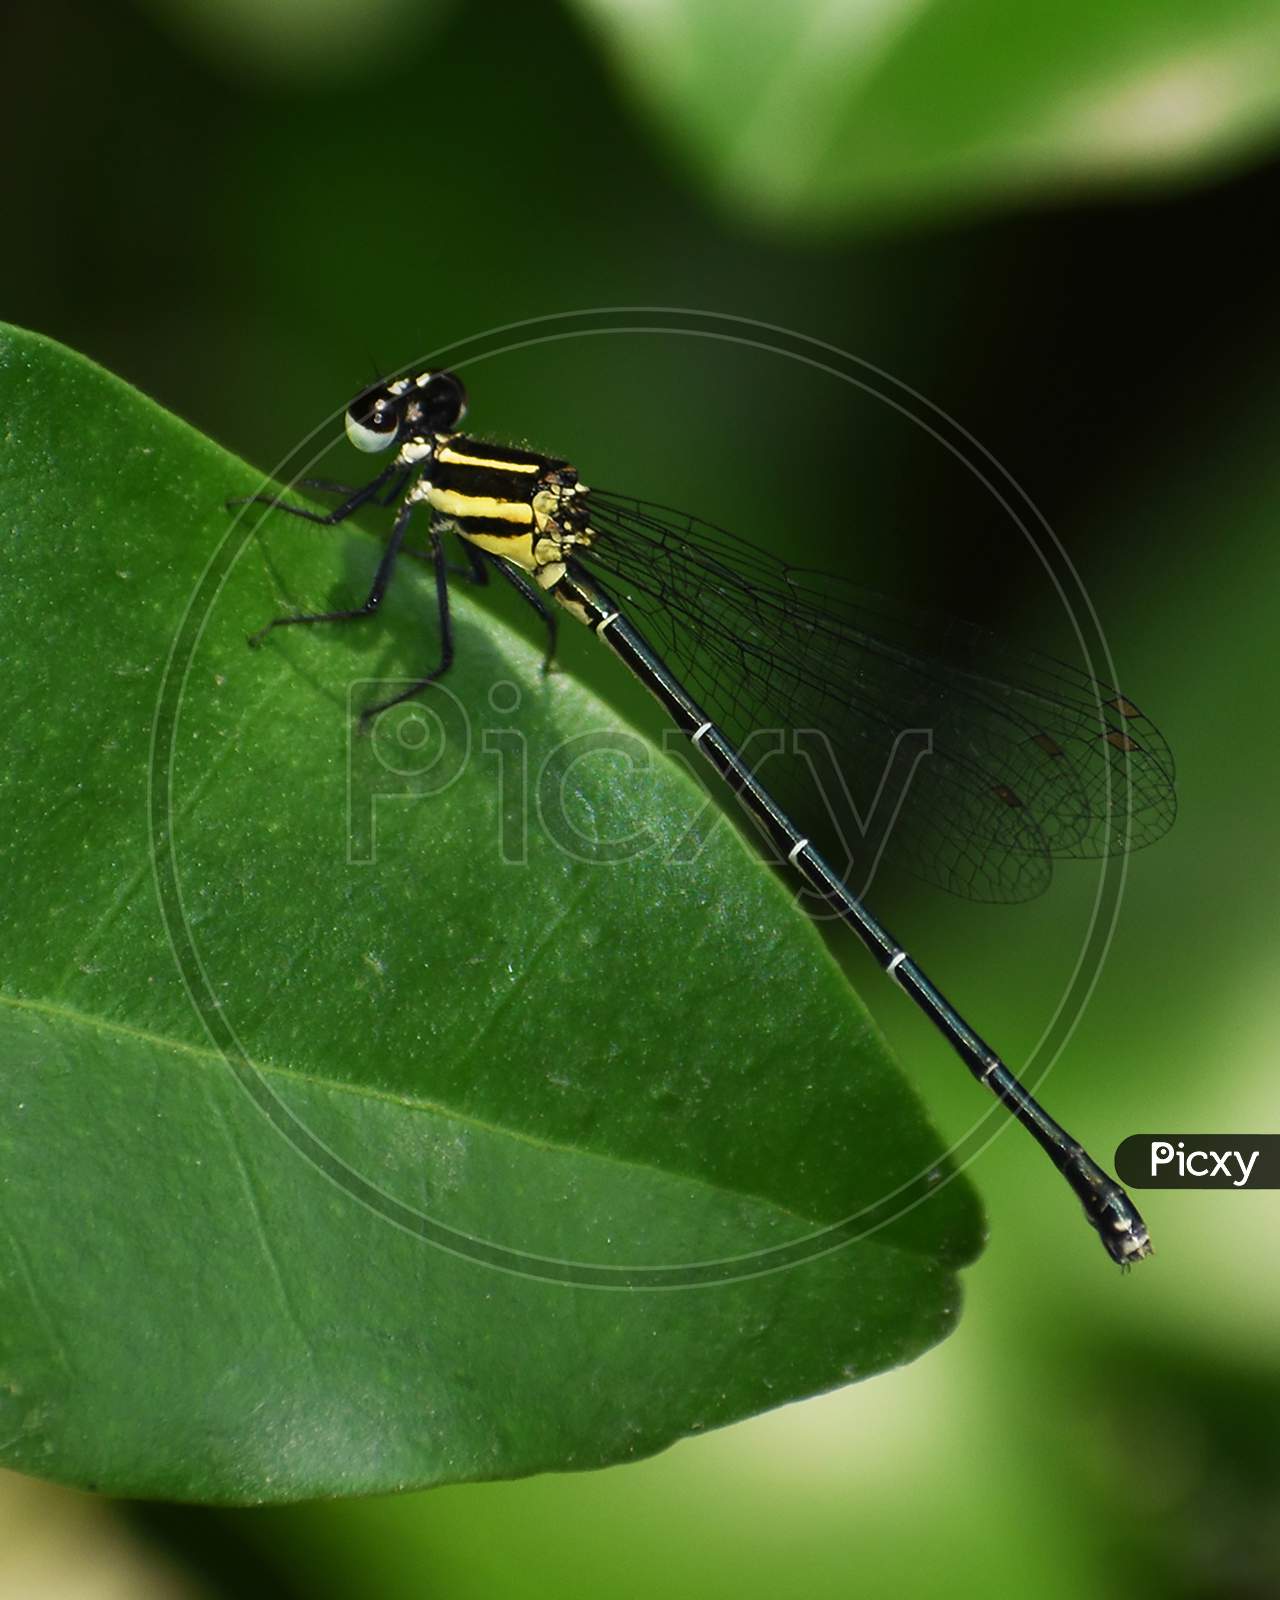 Close Up Macro Wildlife Photography Of Beautiful Dragonfly (Suborder Anisoptera) In Garden On Blur Nature Background. Flying Damselfly (Suborder Zygoptera) Sit On Leaf In Forest. Copy Space For Text.